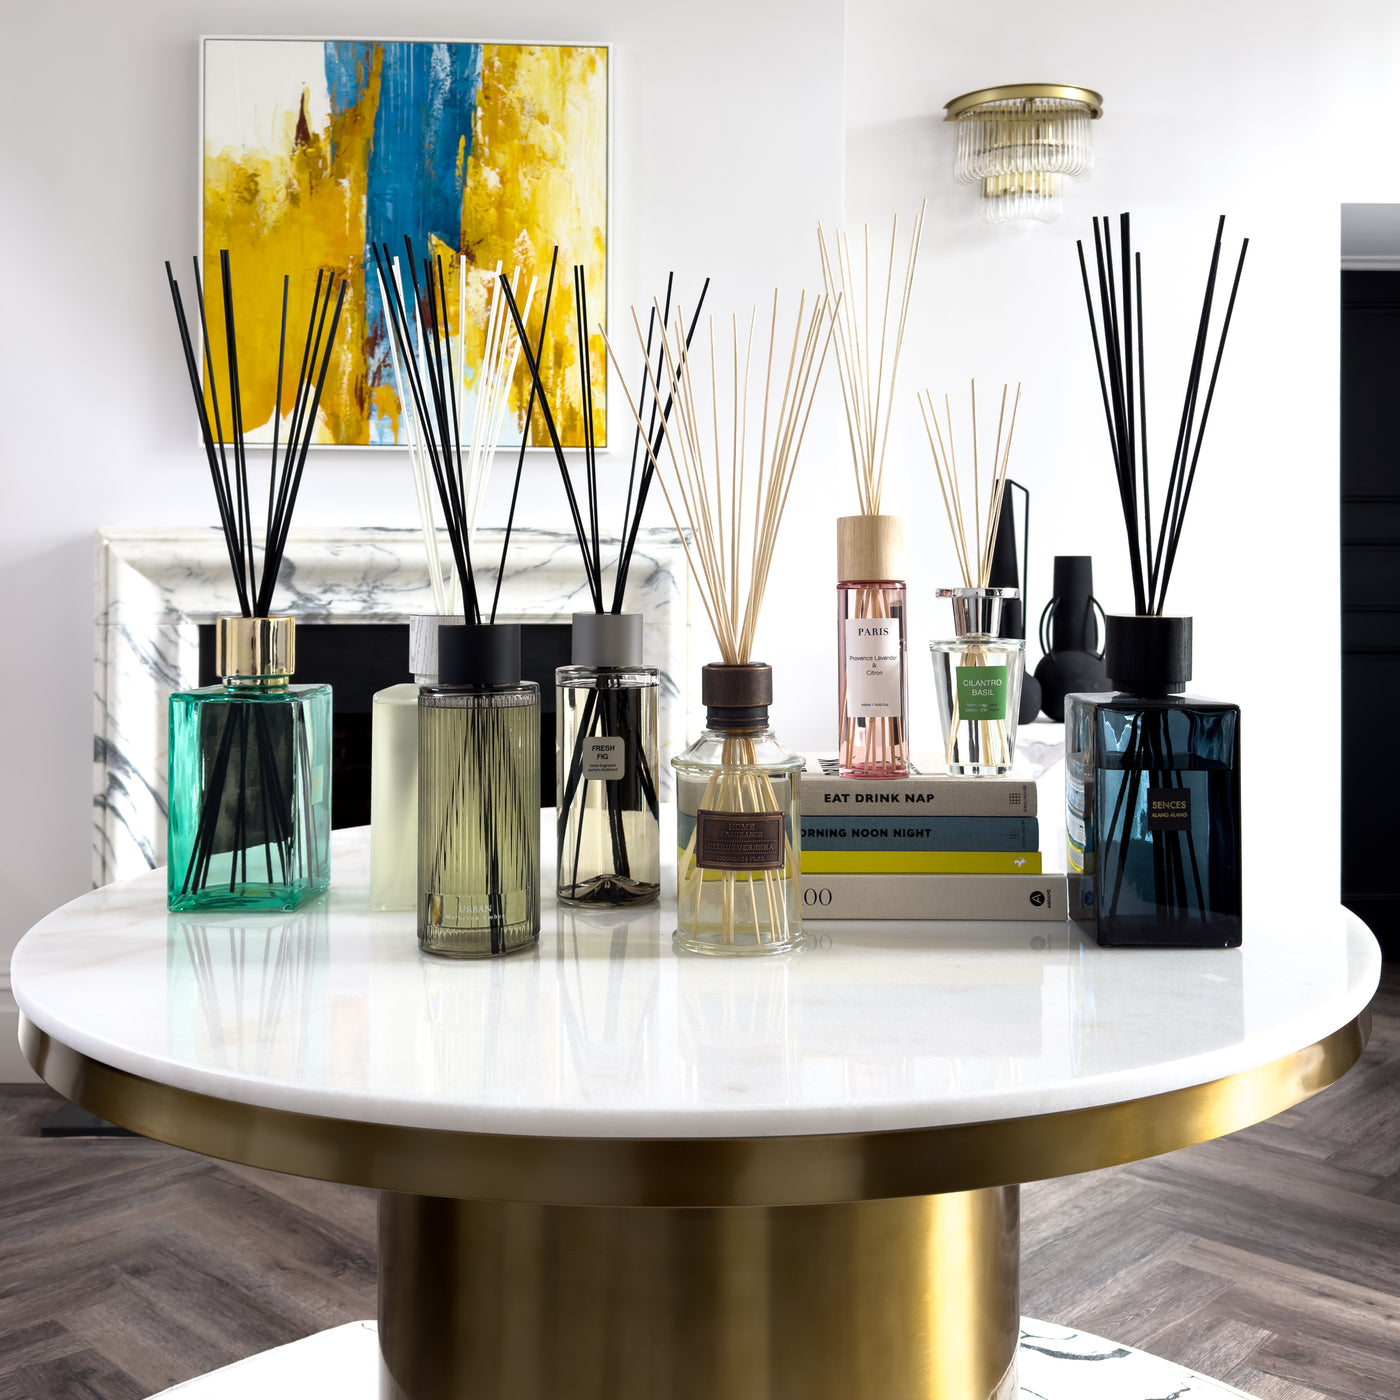 Large Amora Reed Diffuser with Onyx Glass Bottle